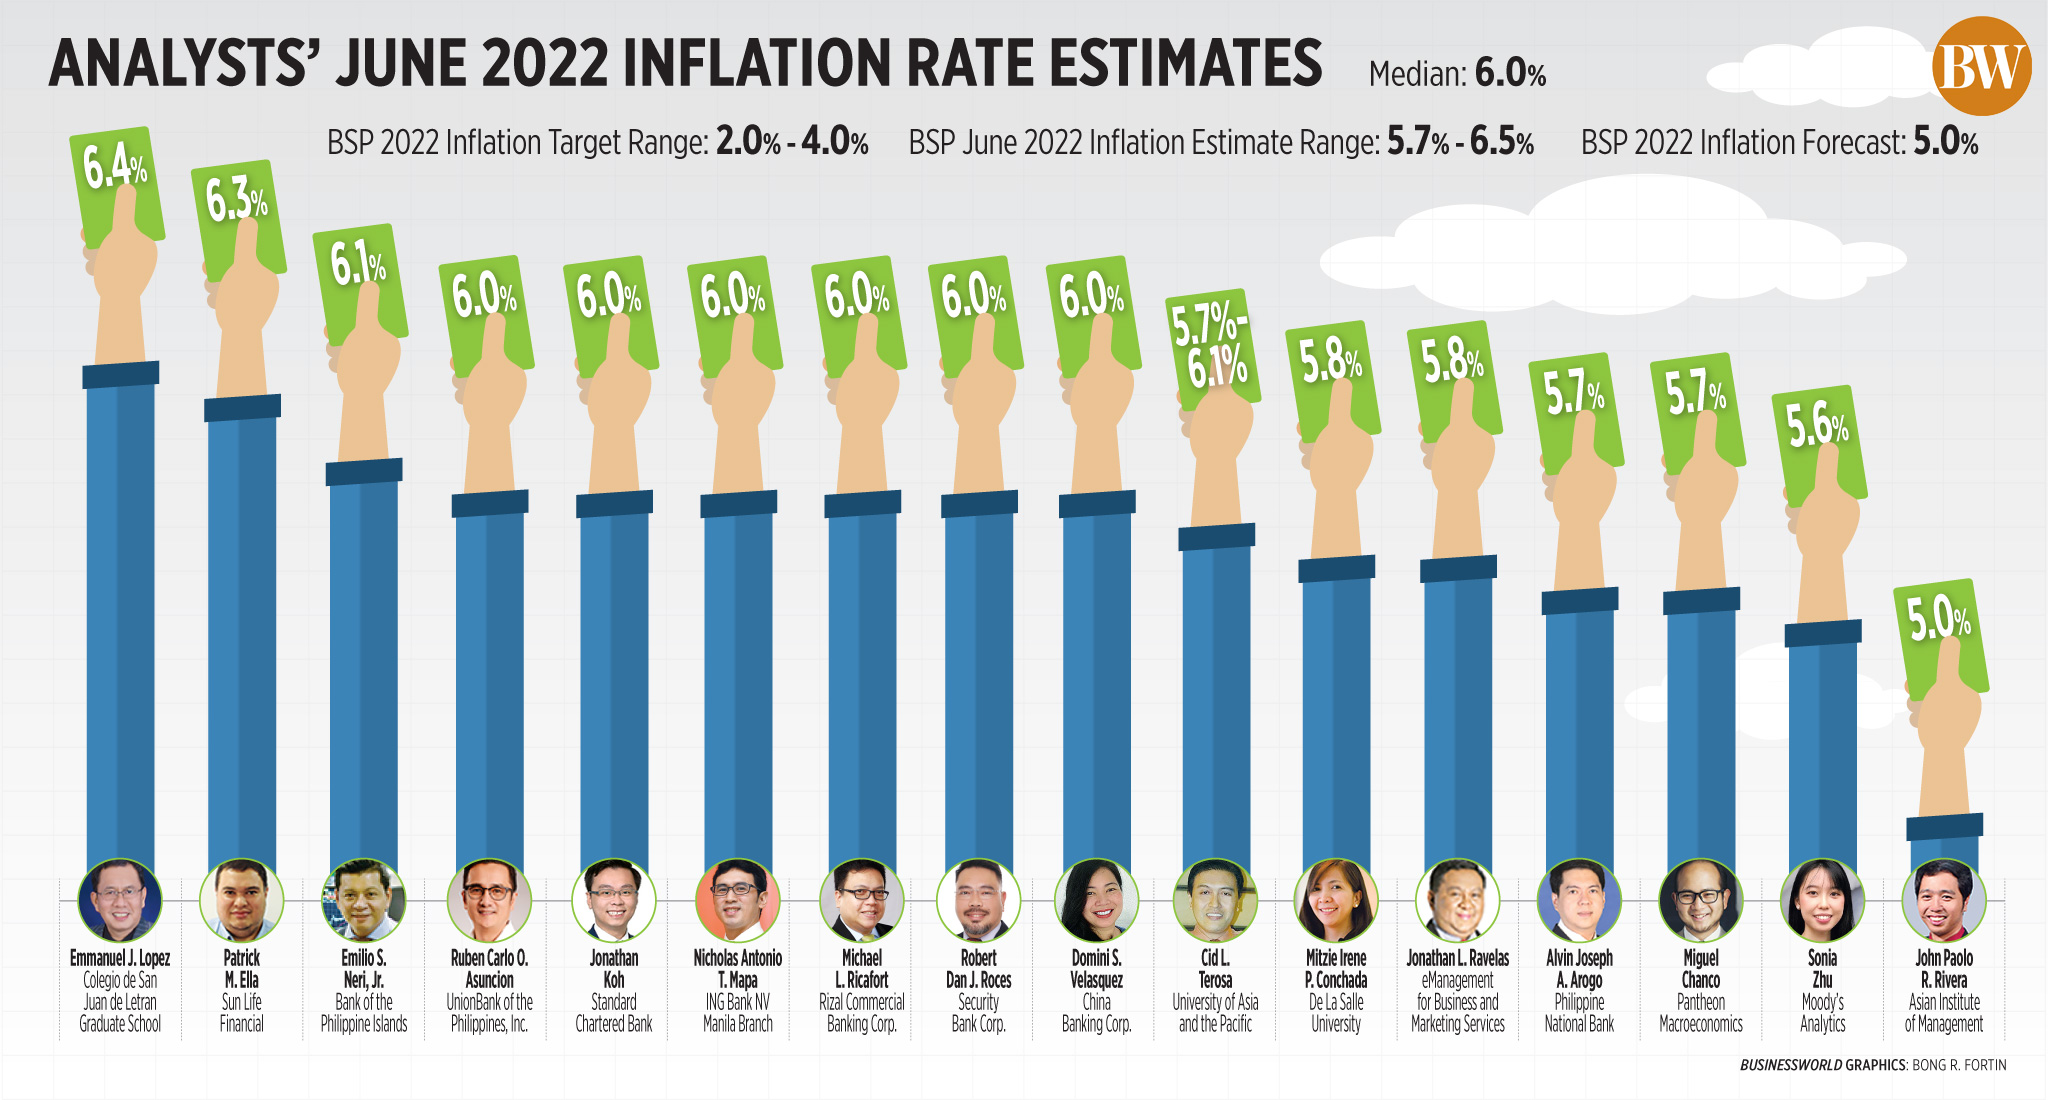 Analysts’ June 2022 inflation rate estimates